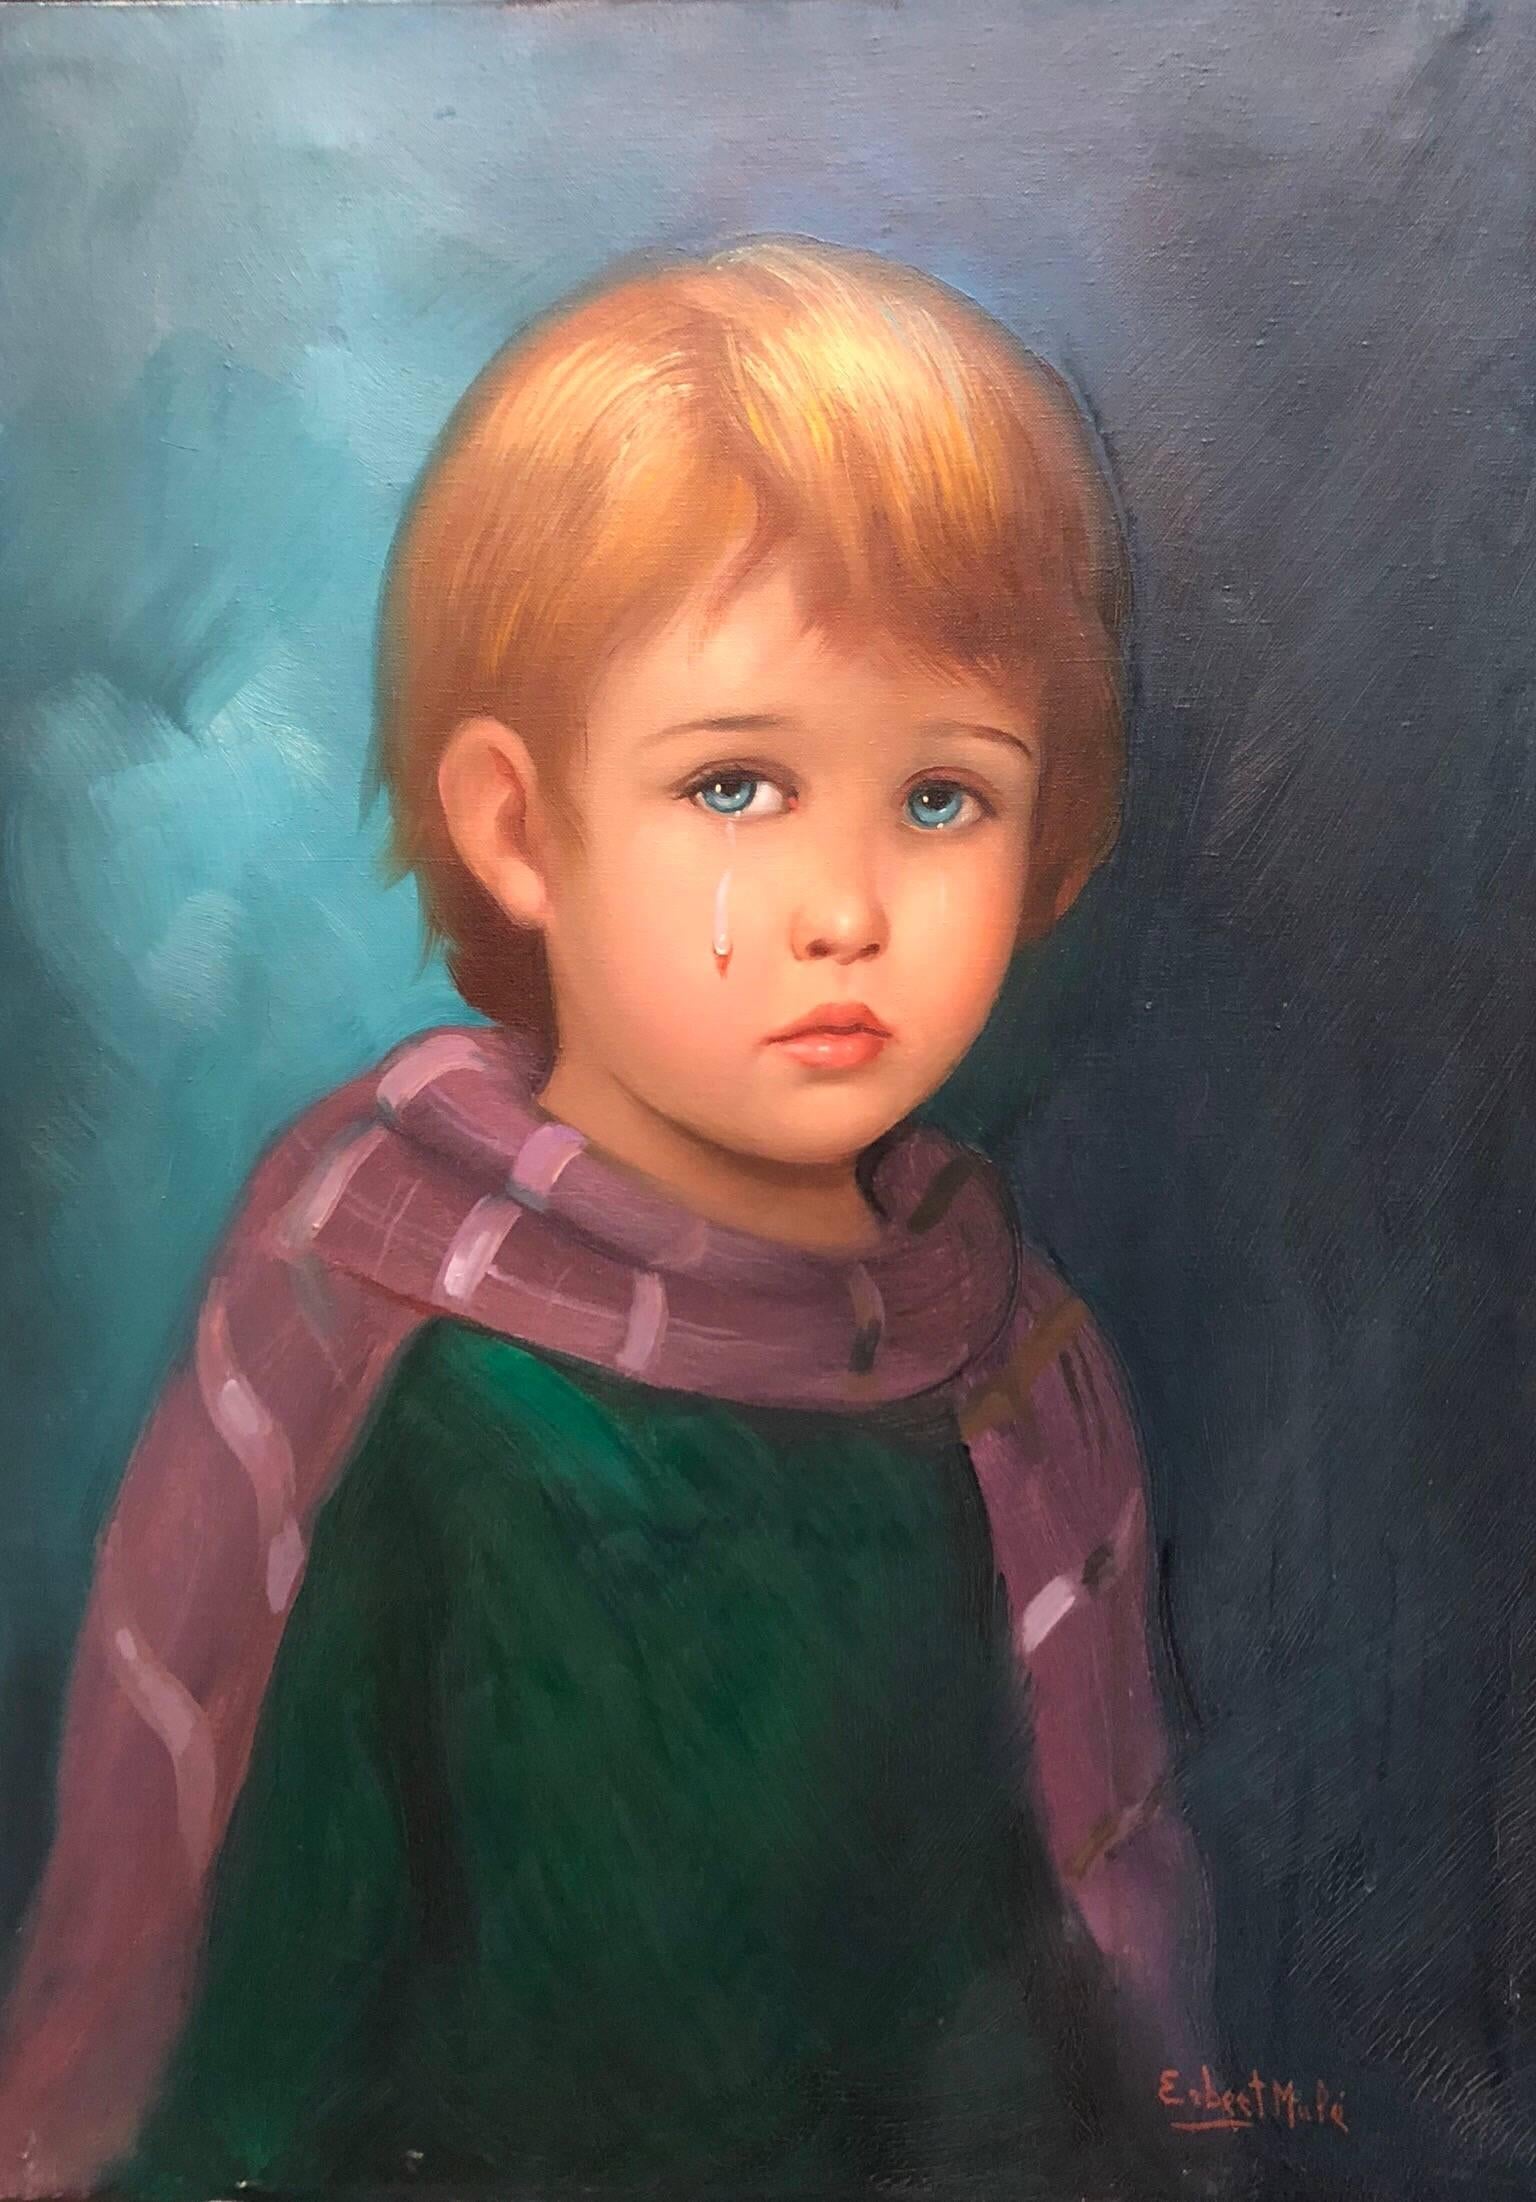 1970s Italian (based on the inscription, the artist's name sounds German or Austrian) big eyed waif crying little boy painting. from the era of Jean Calogero, Barry leighton jones and Margaret Keane.
